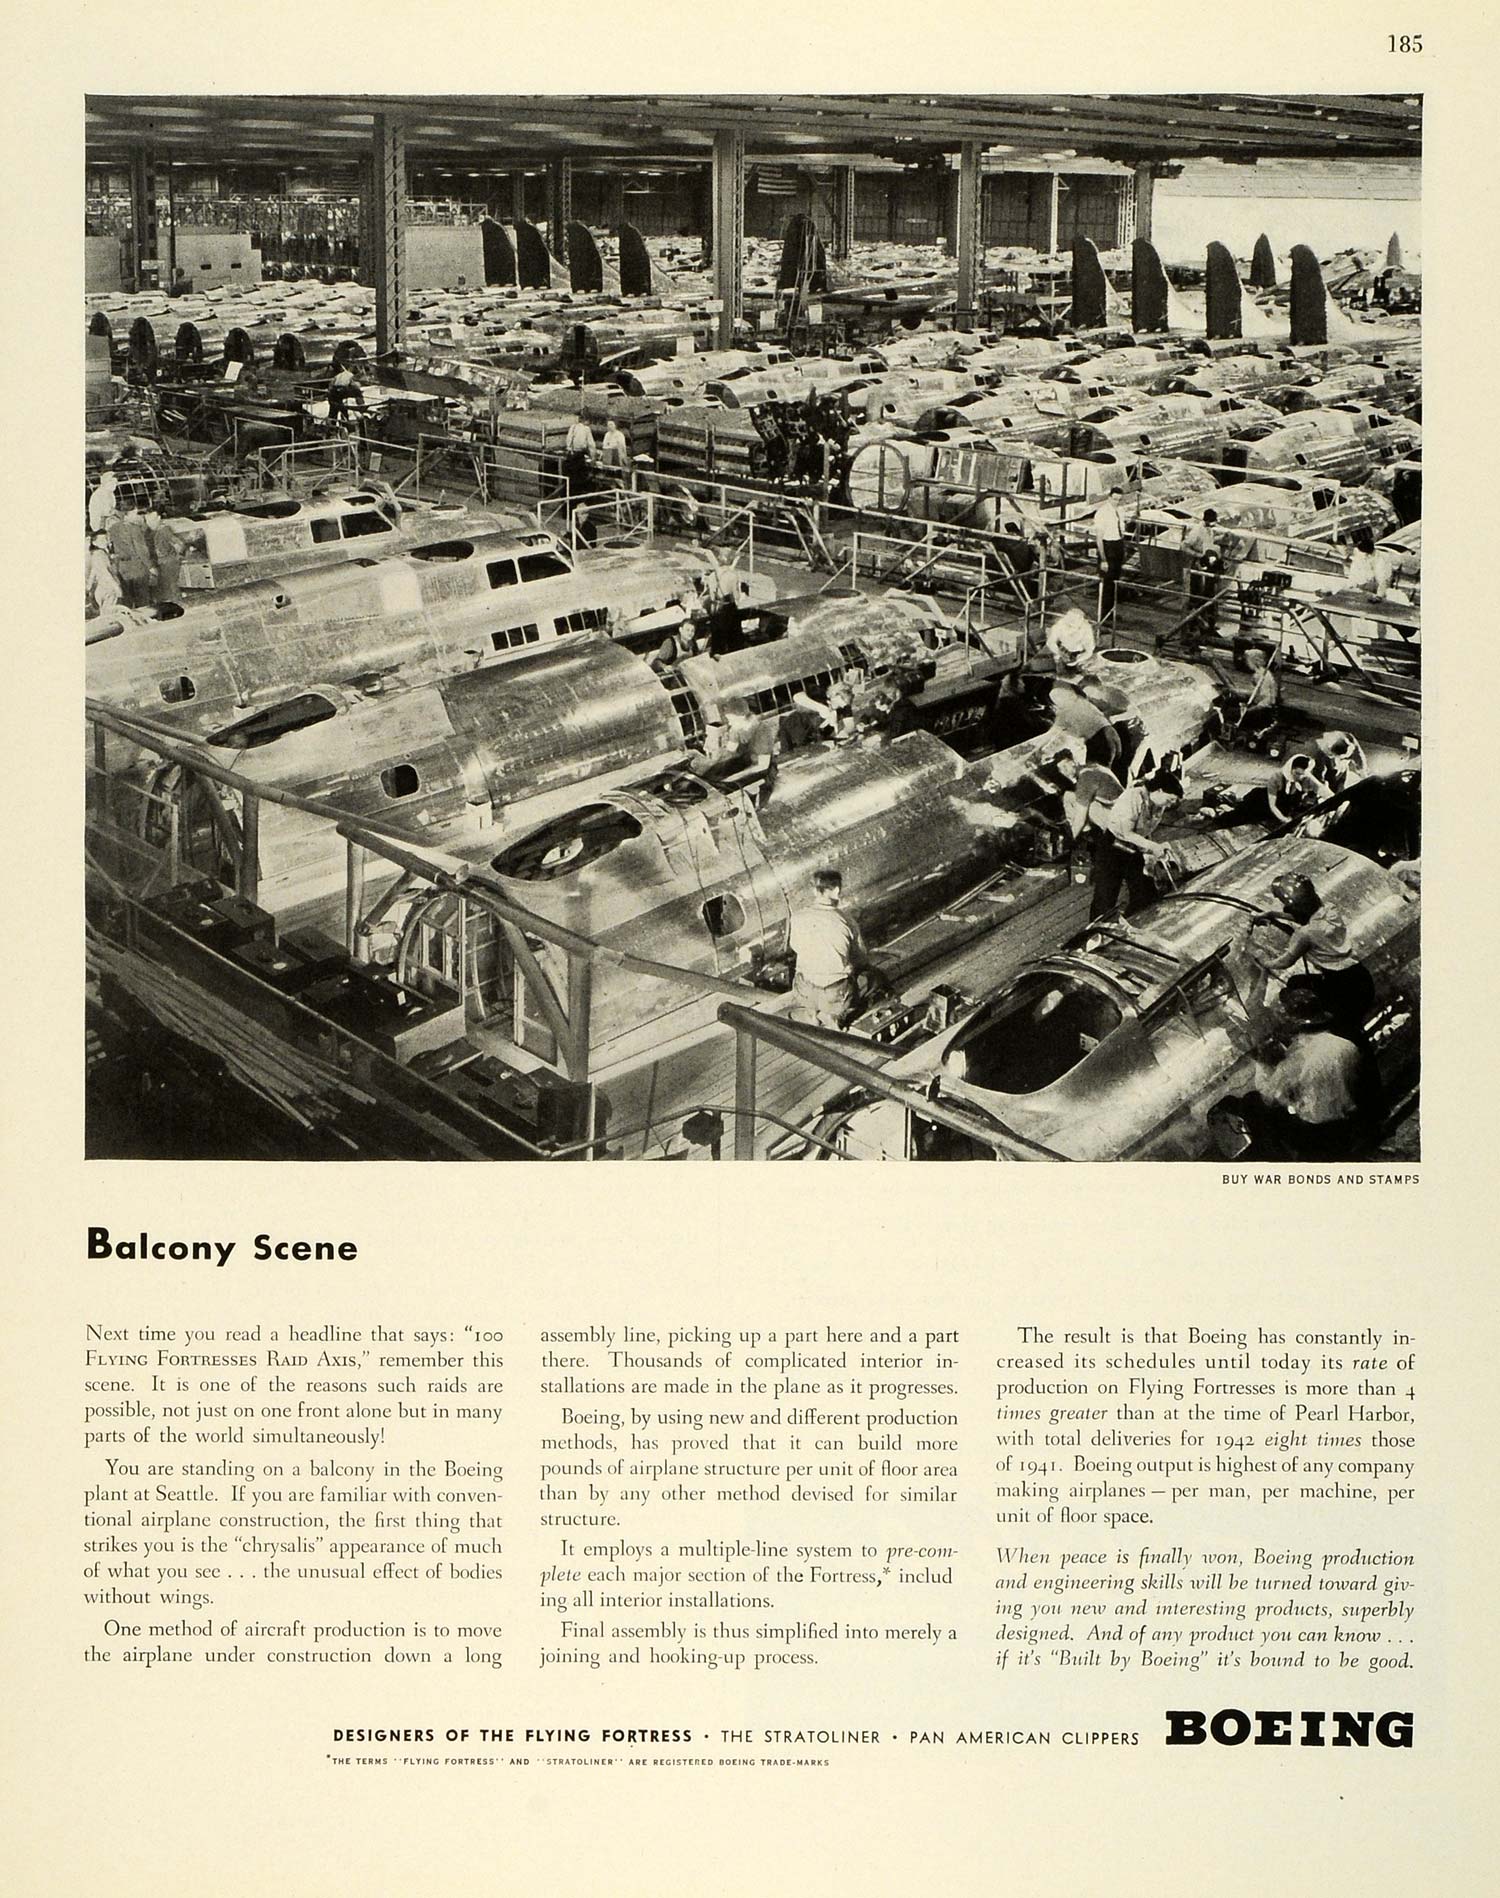 1943 Ad Boeing Aerospace Factory Industry Aircraft Wartime War Production FZ5